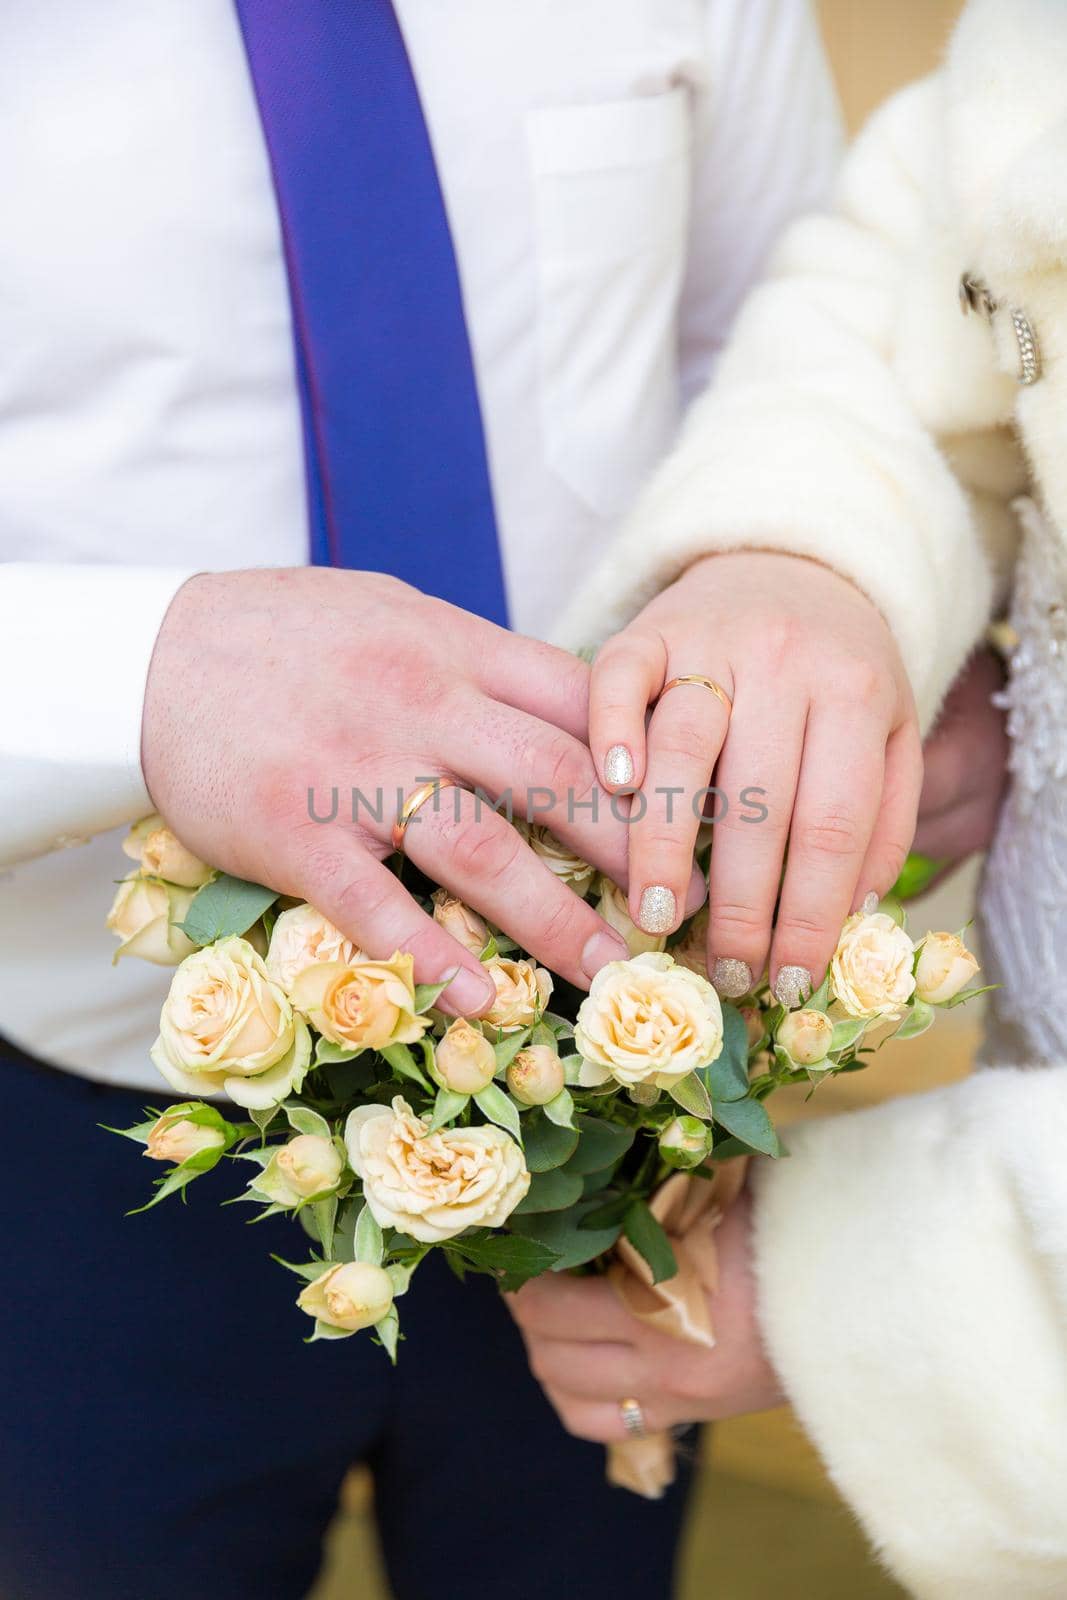 The hands of the newlyweds hold flowers. High quality photo